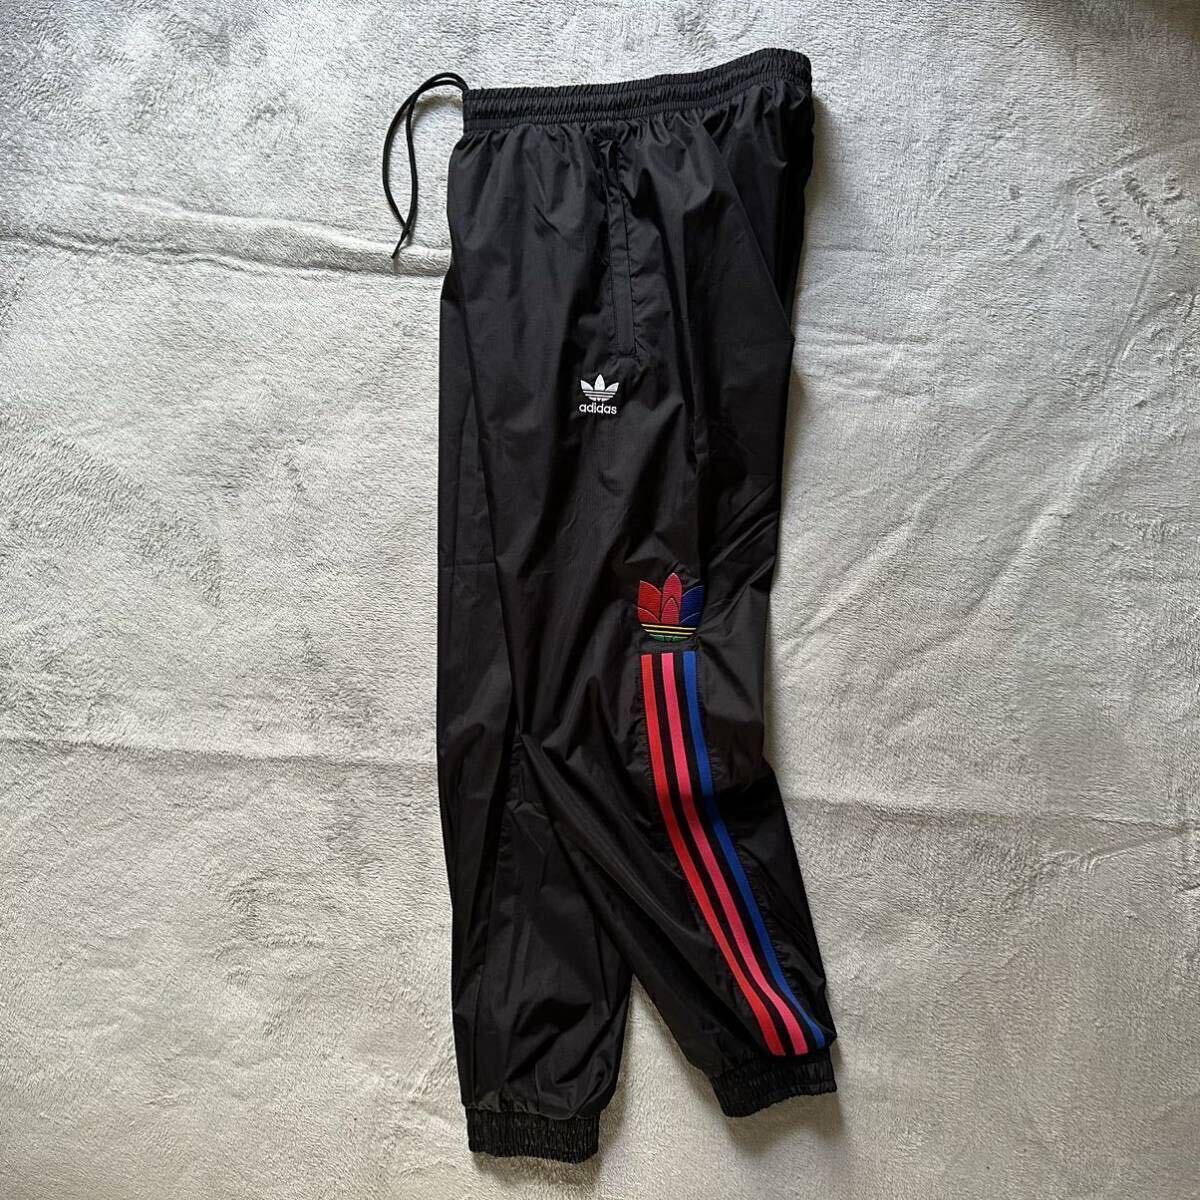  cheap postage L size new goods adidas originals Adidas Originals to ref . il truck pants nylon black red black red aGE0839